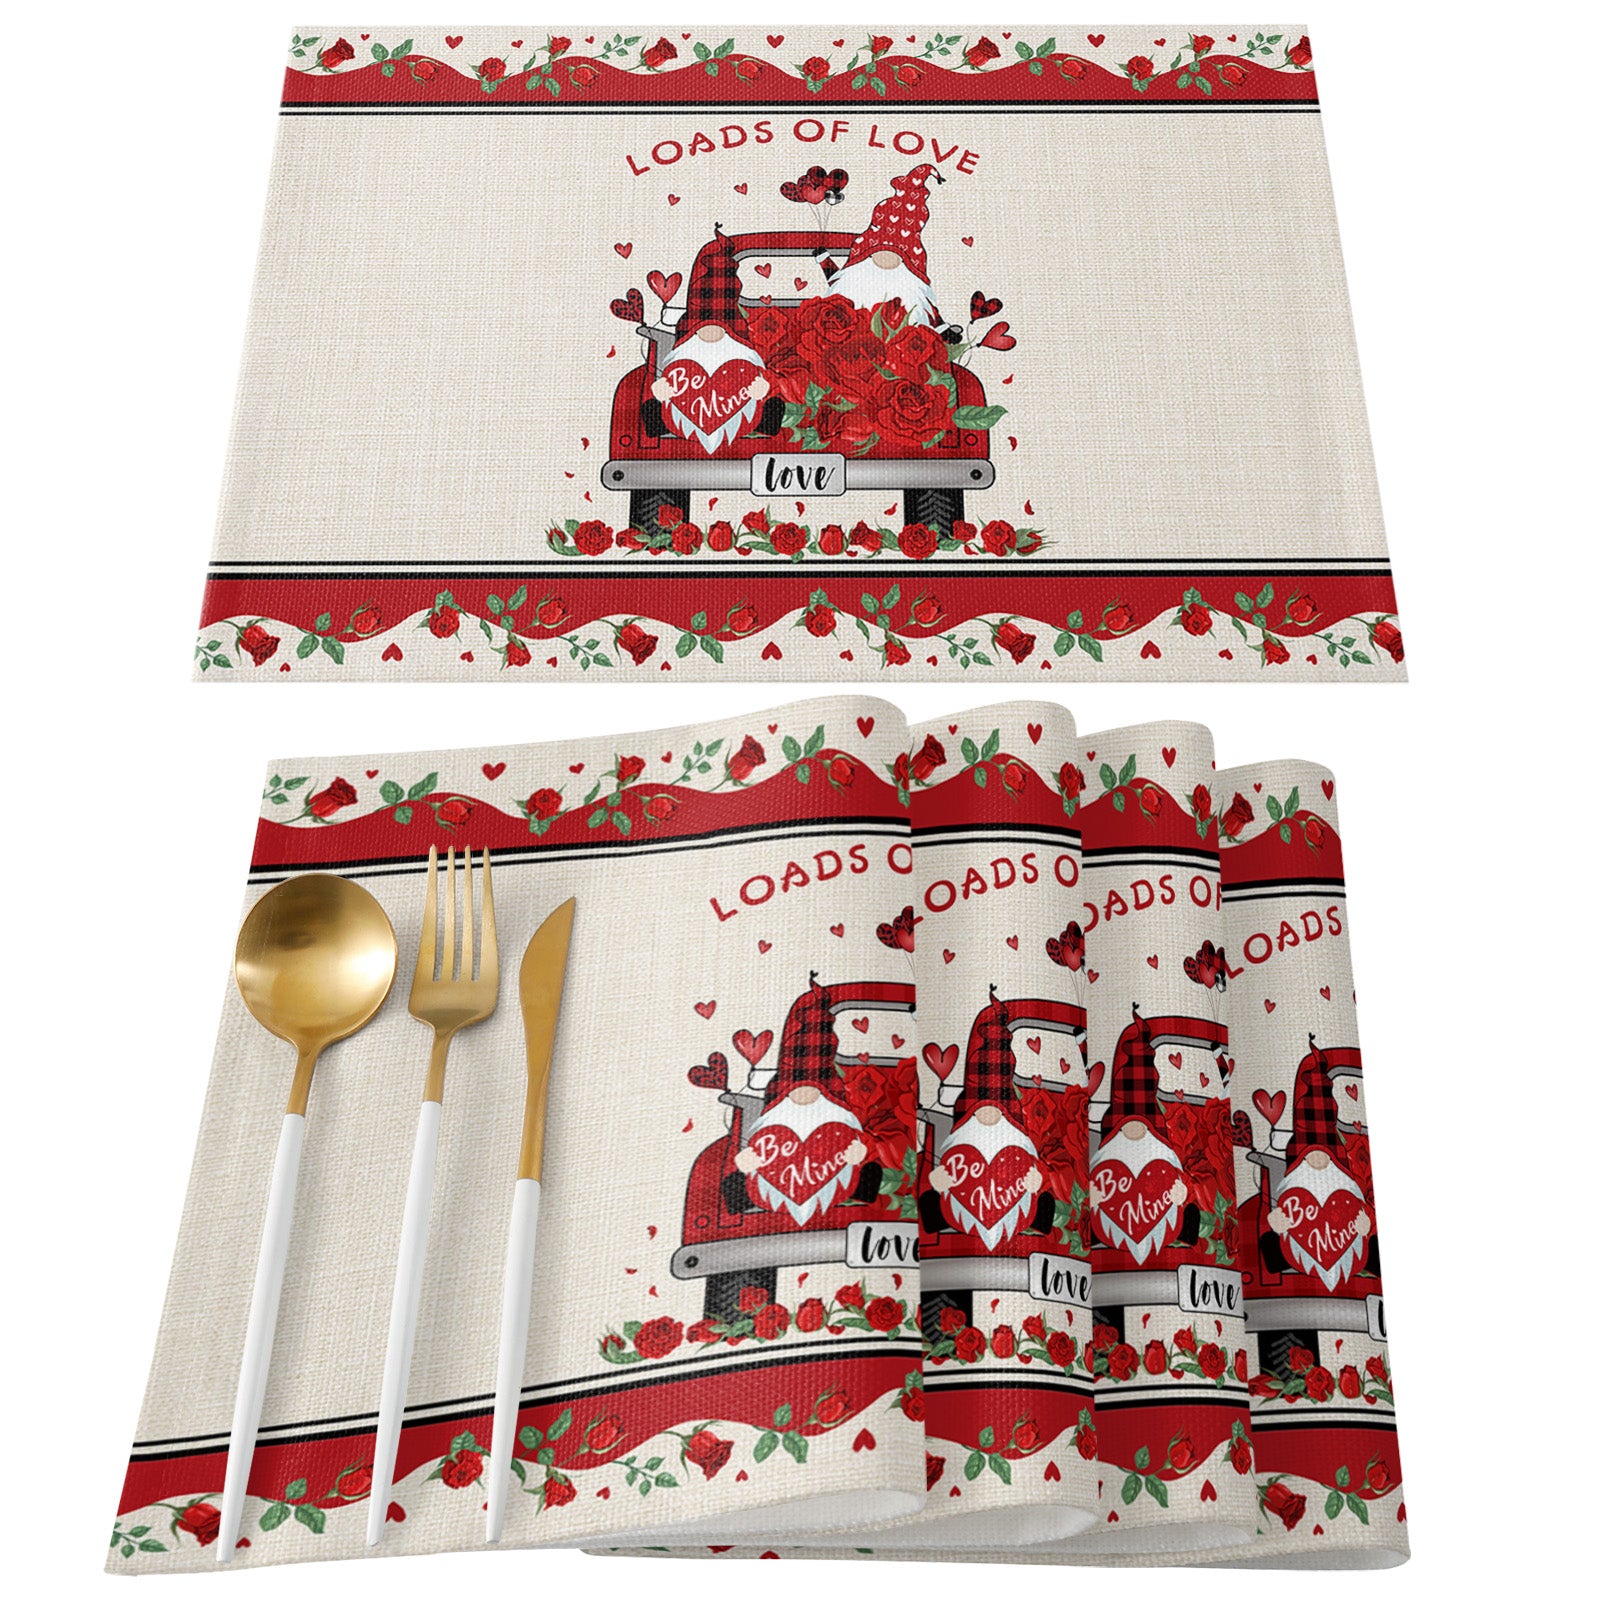 Loads Of Love - Adorable Gnome Themed Placemat